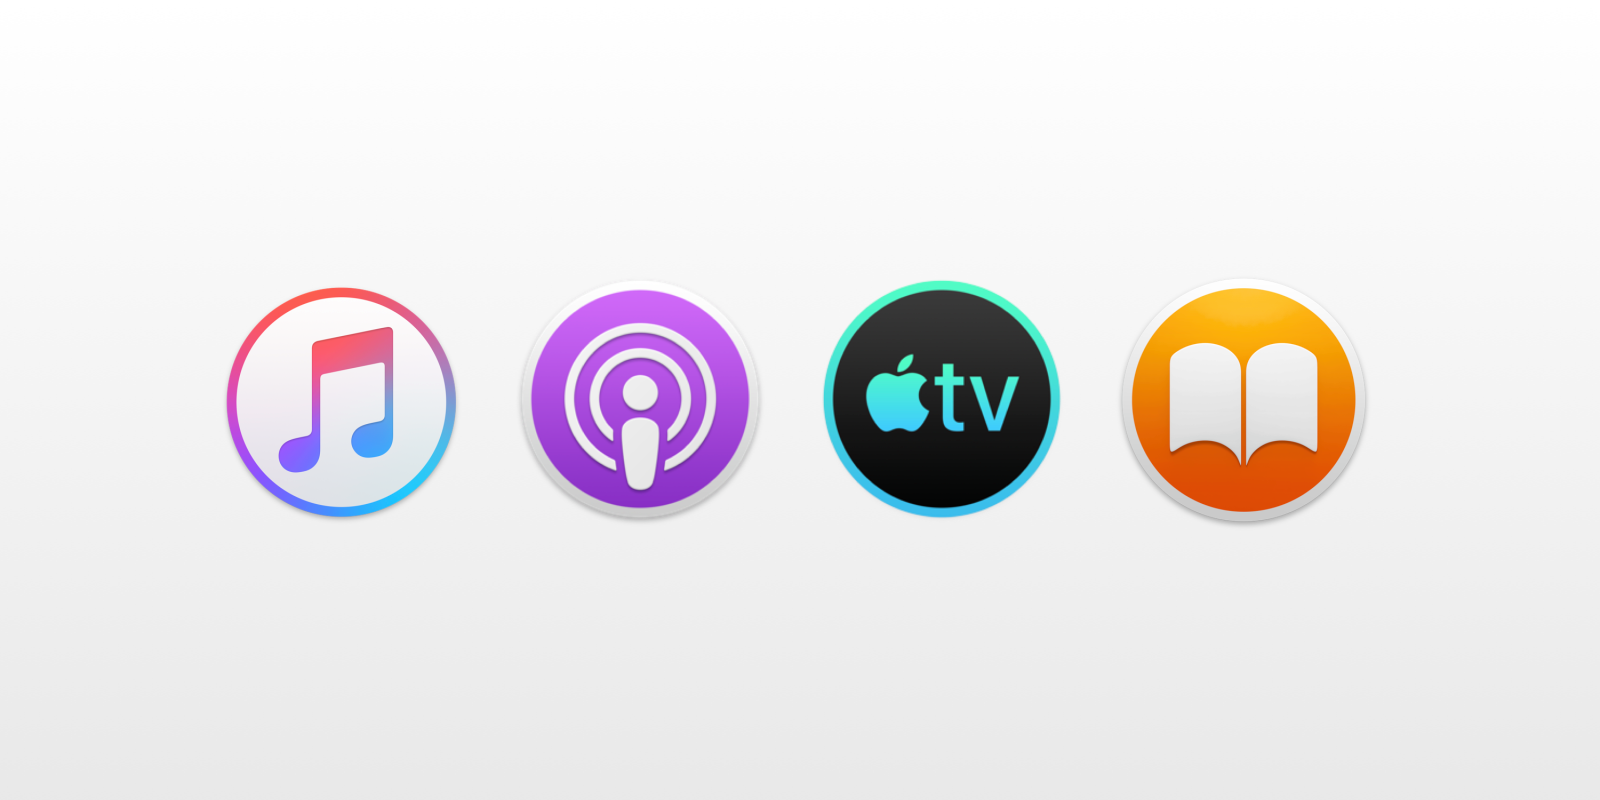 Mac Podcast App Itunes Replacement